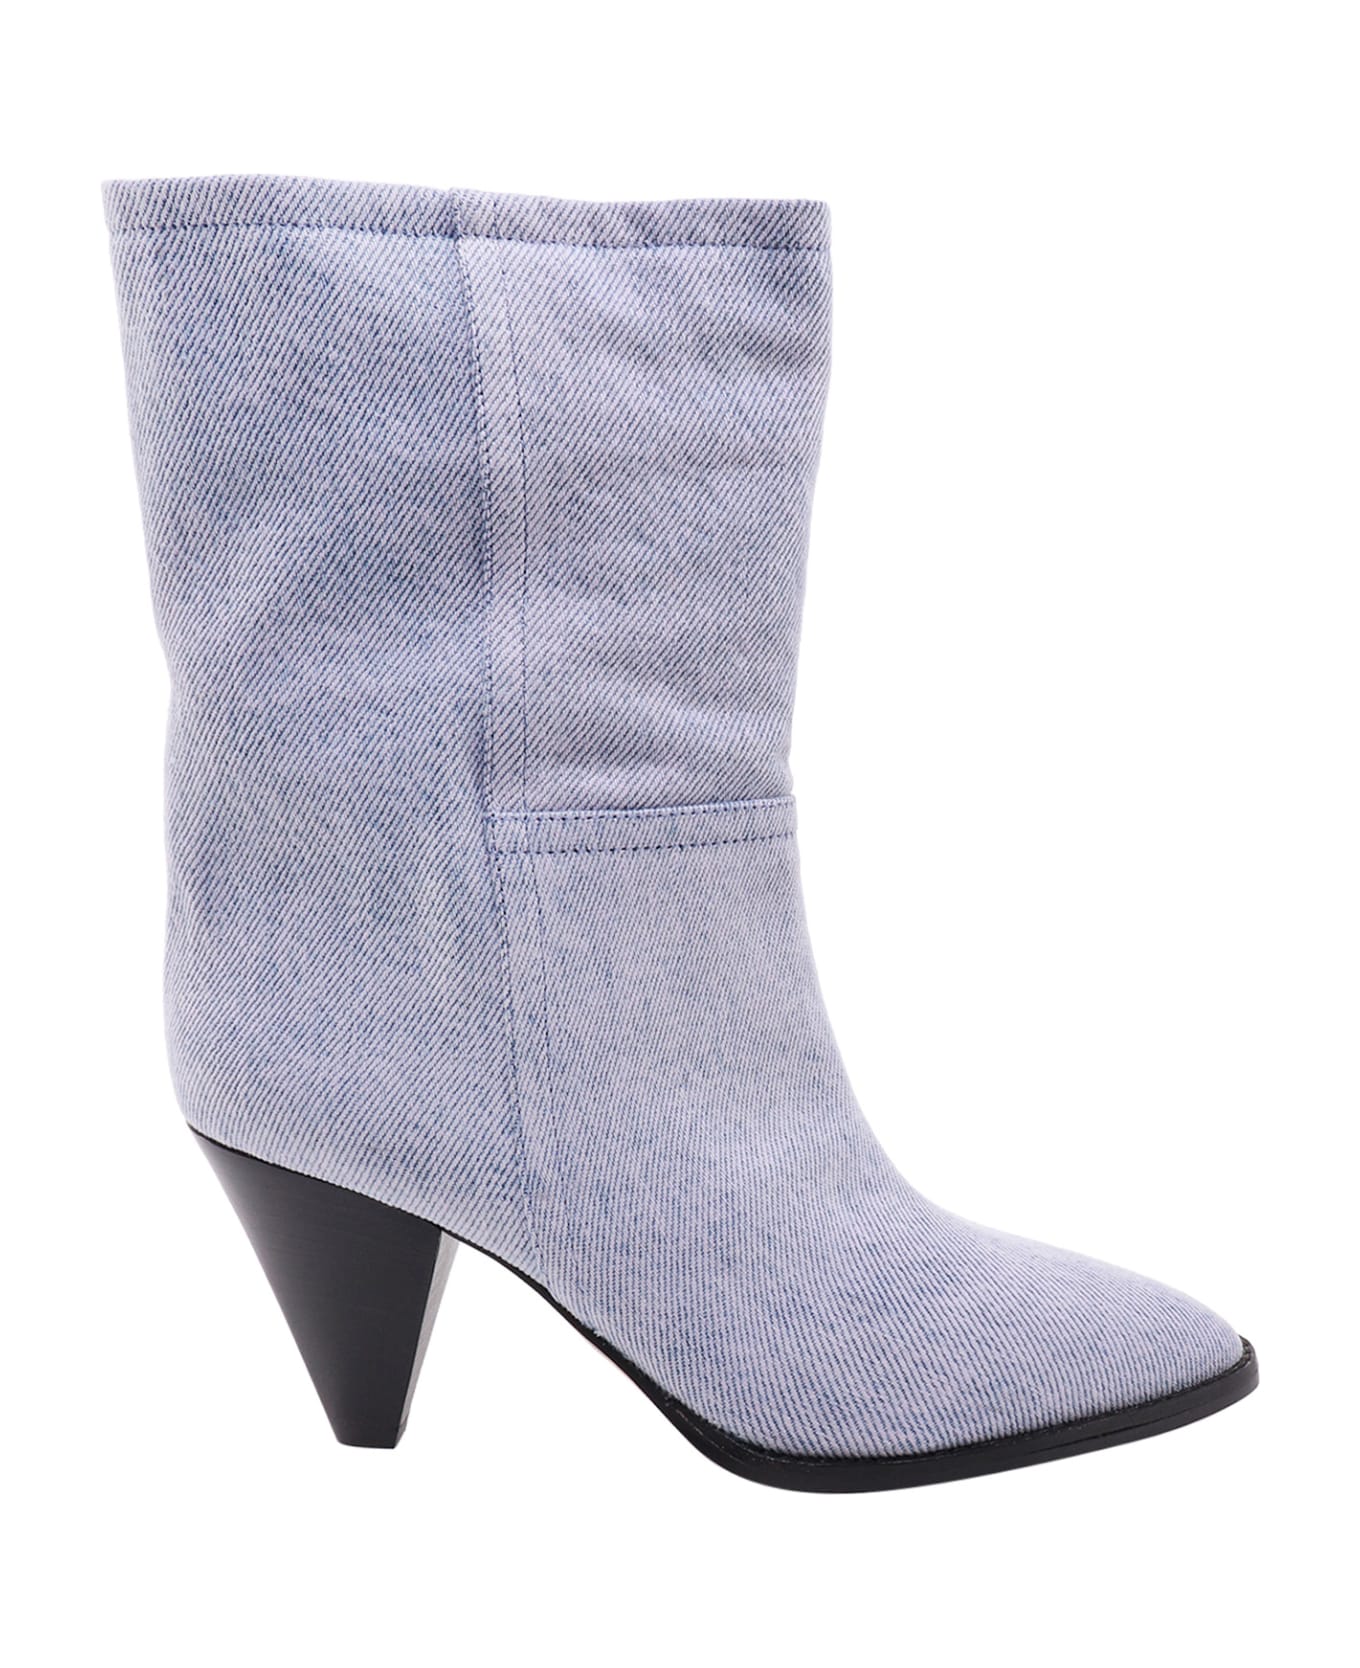 Isabel Marant Rouxa Ankle Boots - Lilac